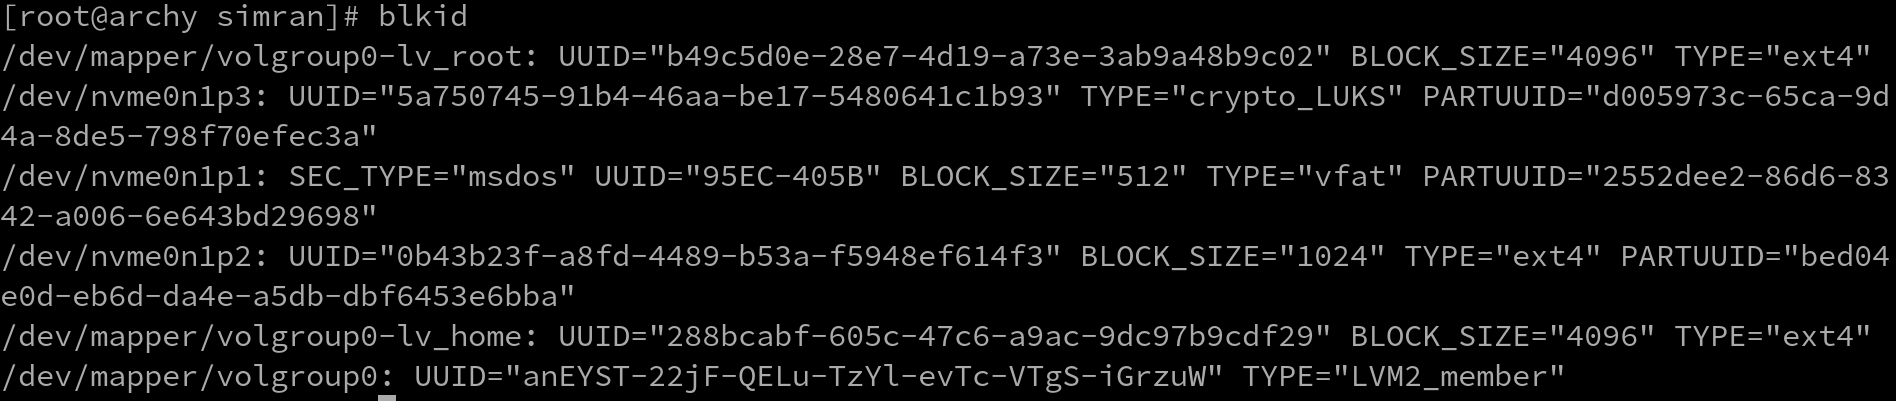 List of all the block devices in arch linux with their UUIDs - the output of blkid command.